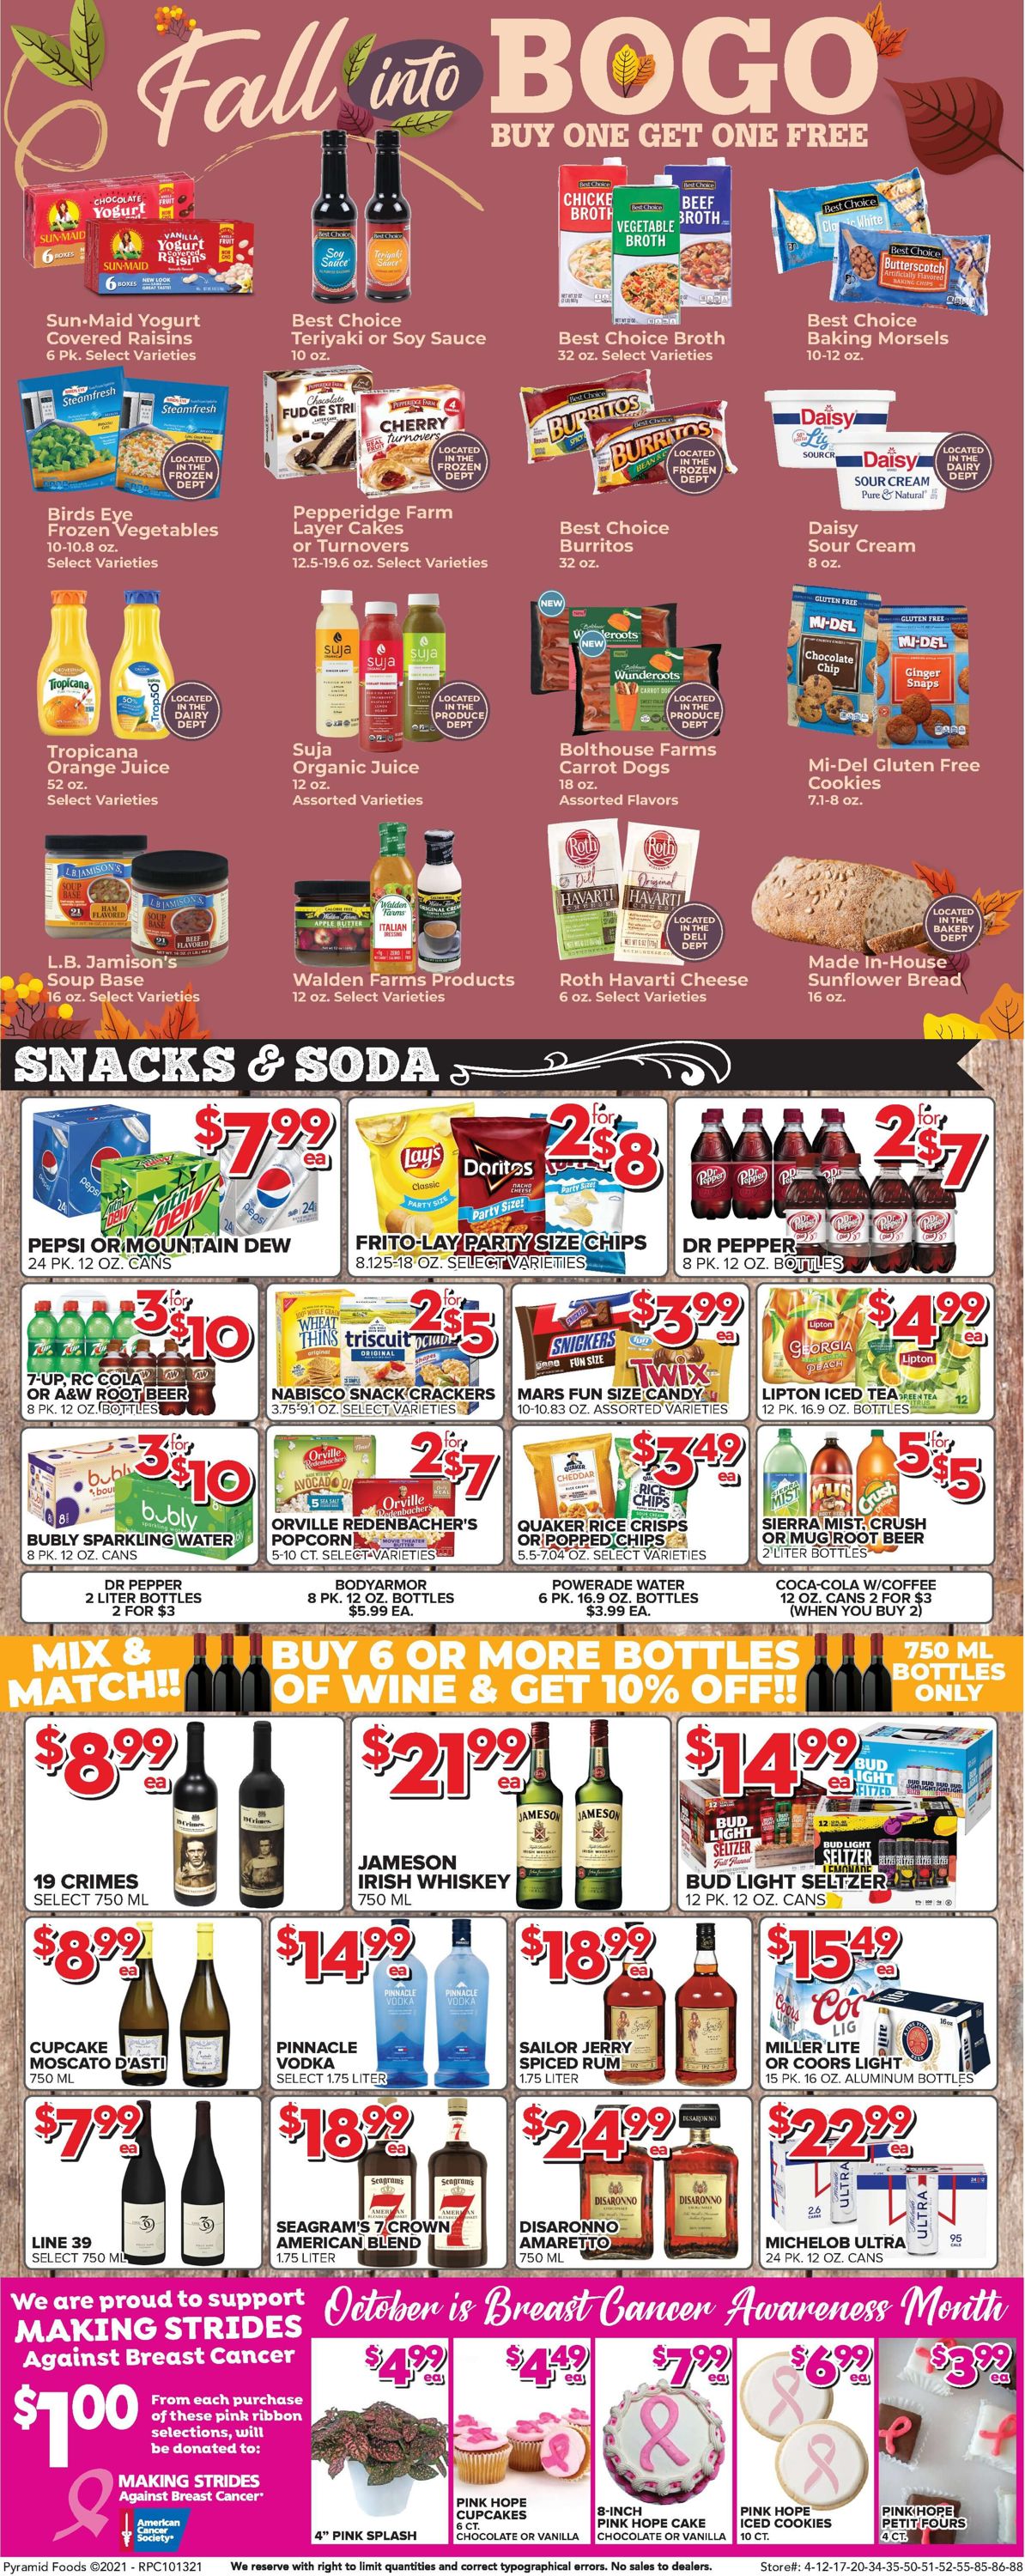 Price Cutter Weekly Ad Circular - valid 10/13-10/19/2021 (Page 4)